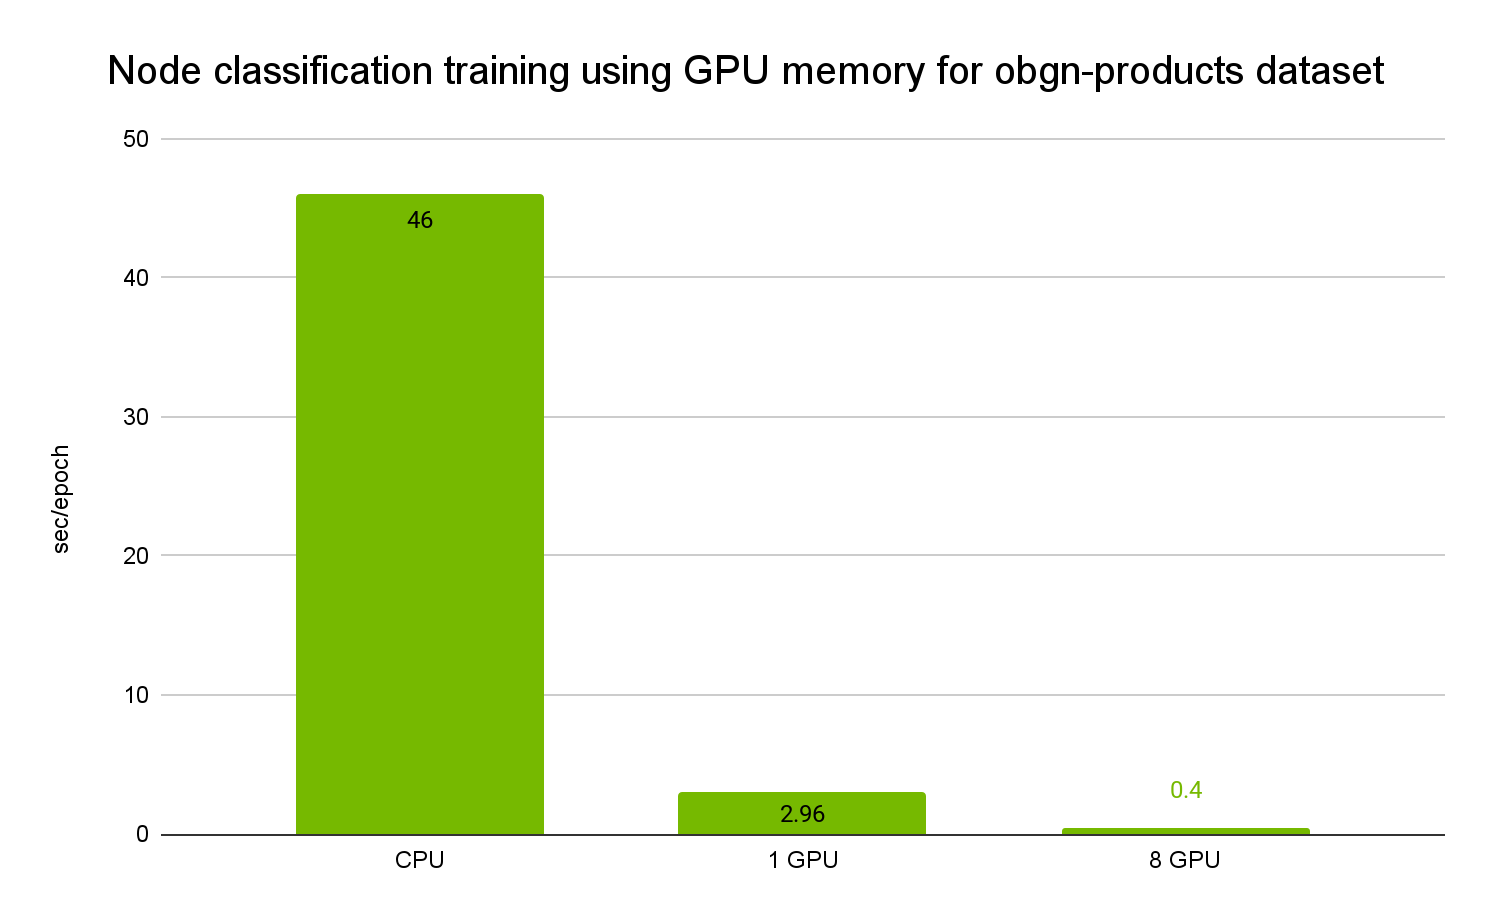 A bar graph compares the training times in sec/epoch for the obgn-products dataset on CPU (46 seconds) and with GPU memory on one GPU (2.96 seconds), and eight GPUs (0.4 seconds).